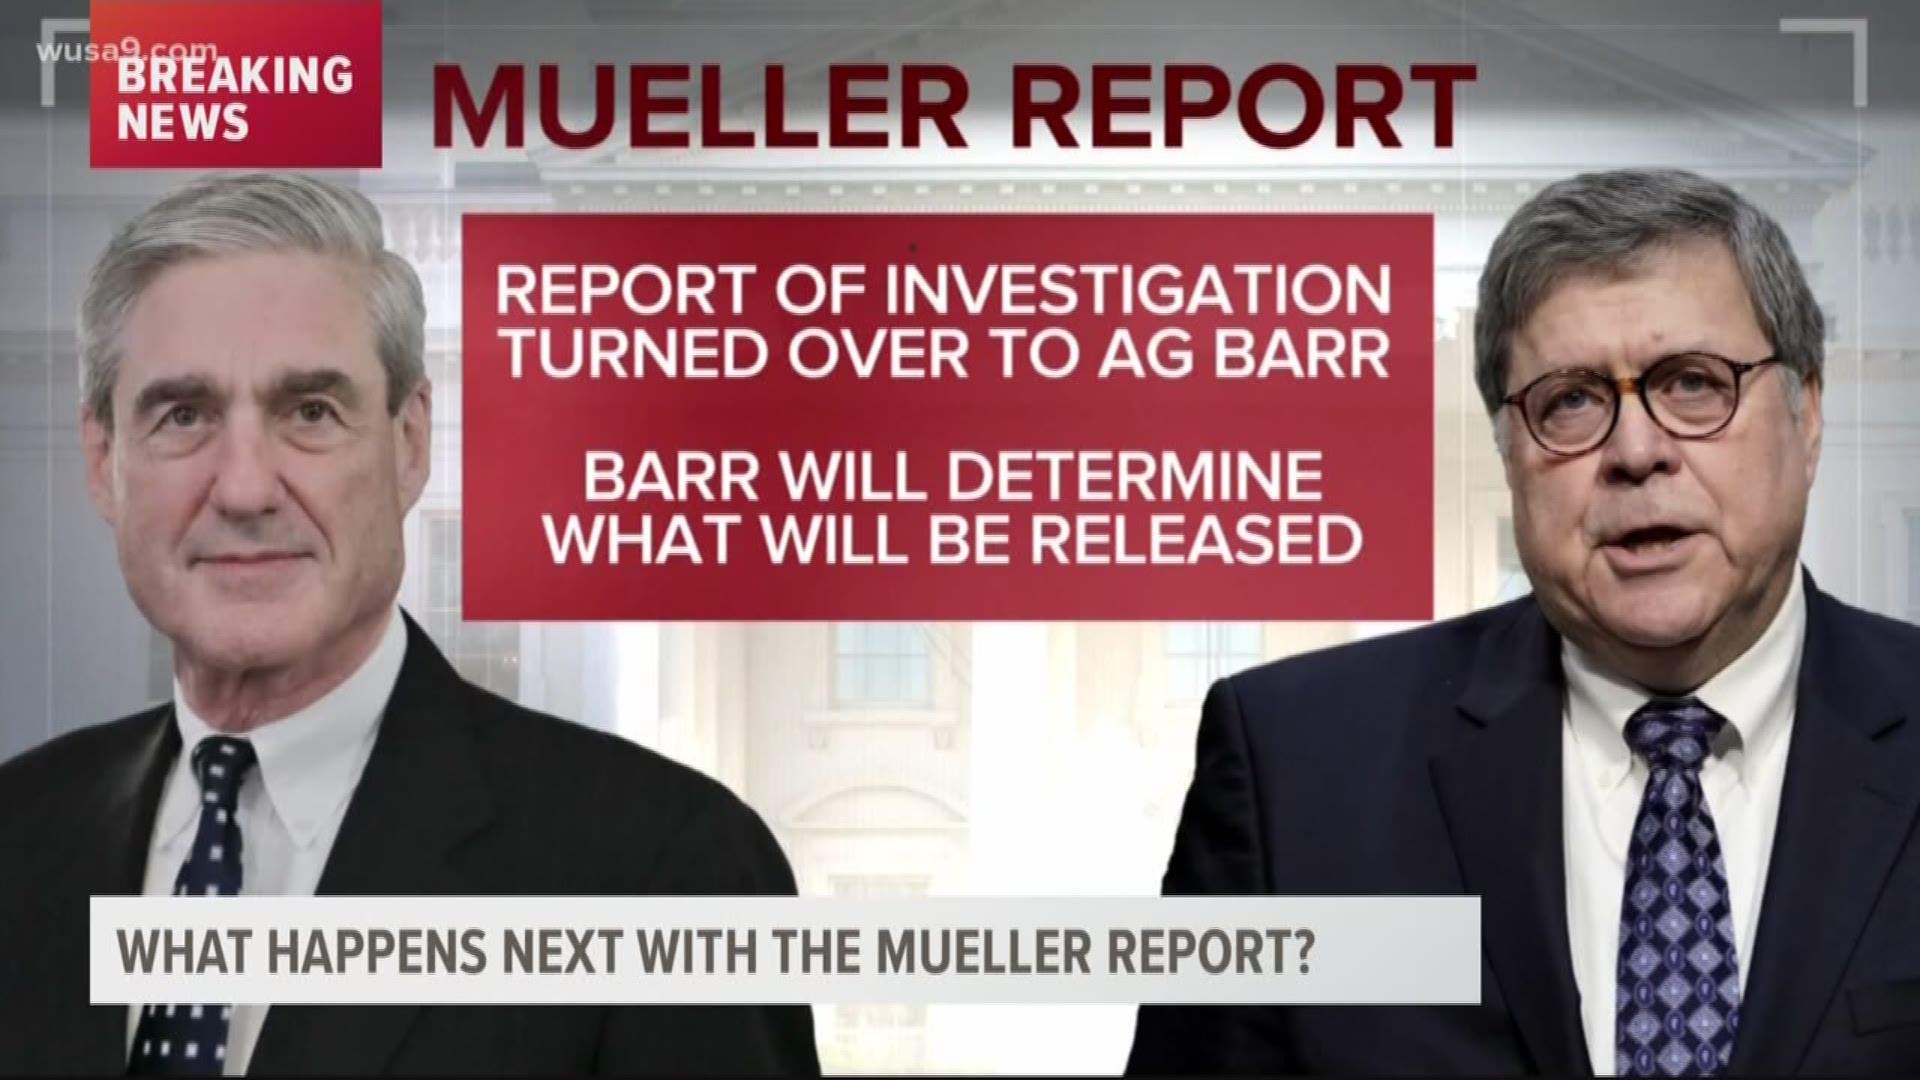 What happens next with the Mueller report?